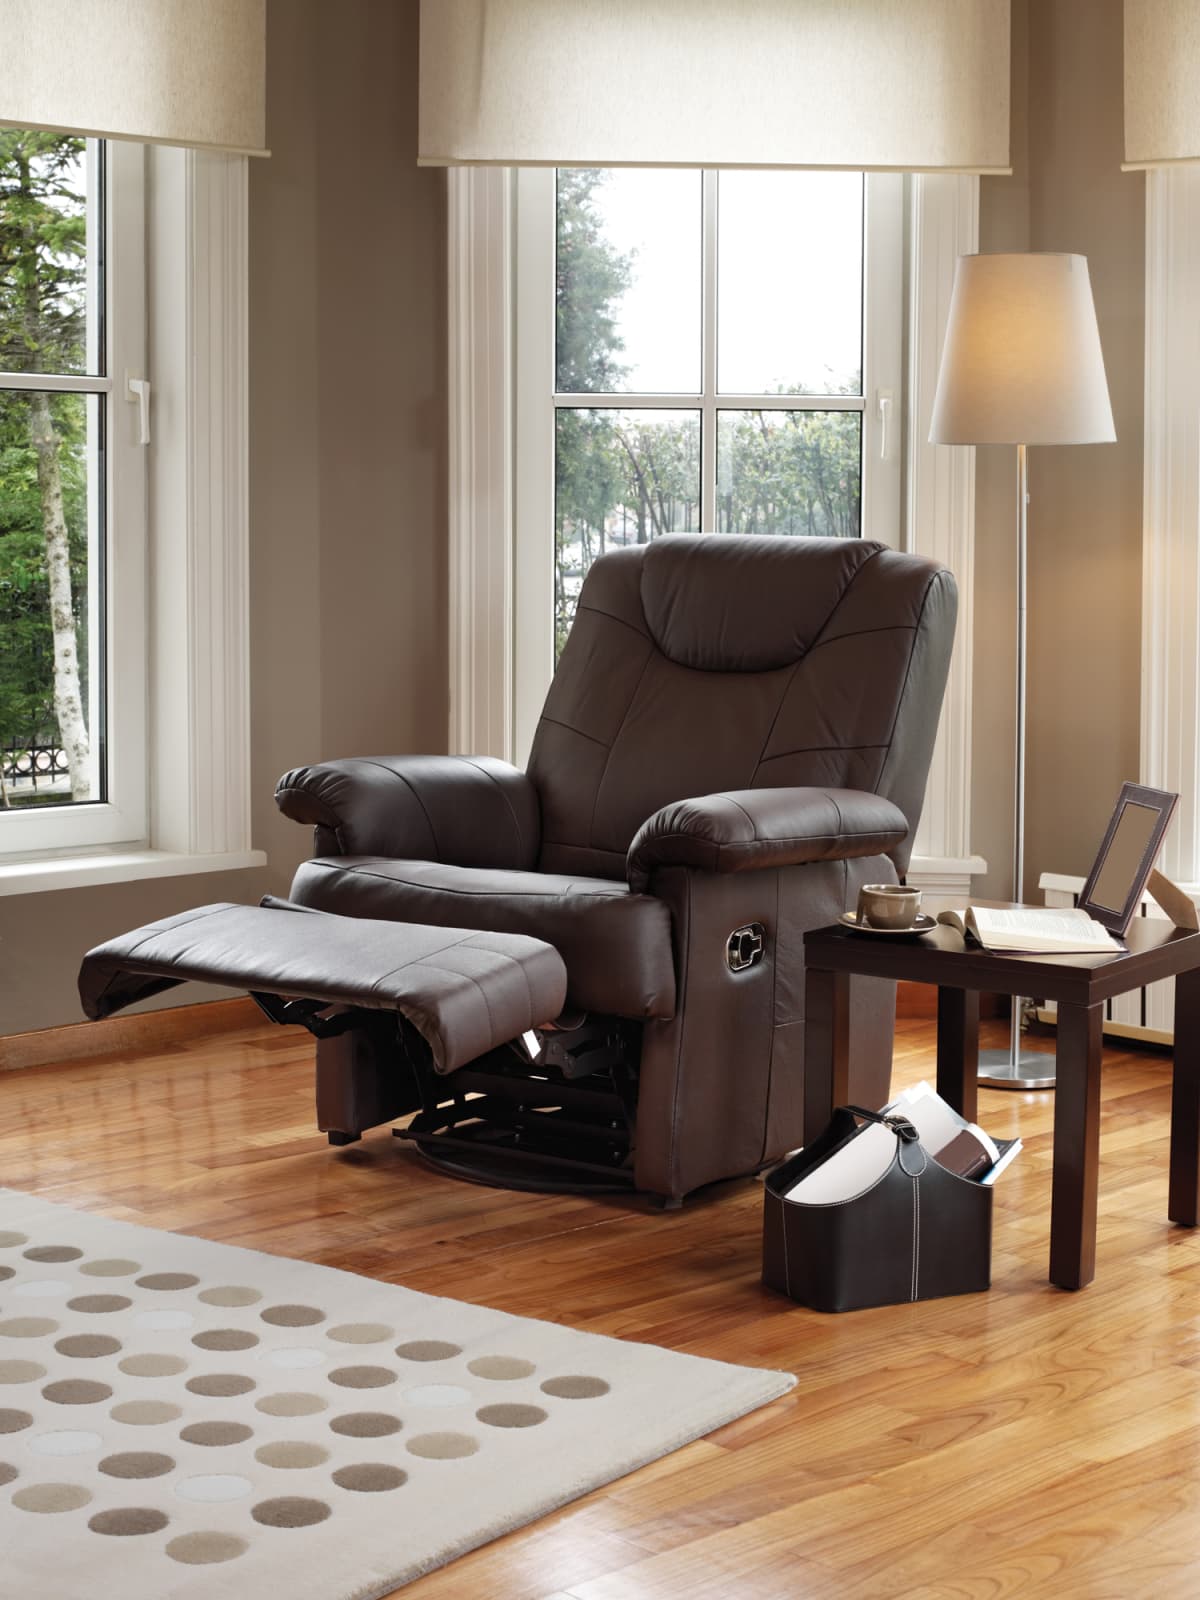 A bulky recliner in the living room